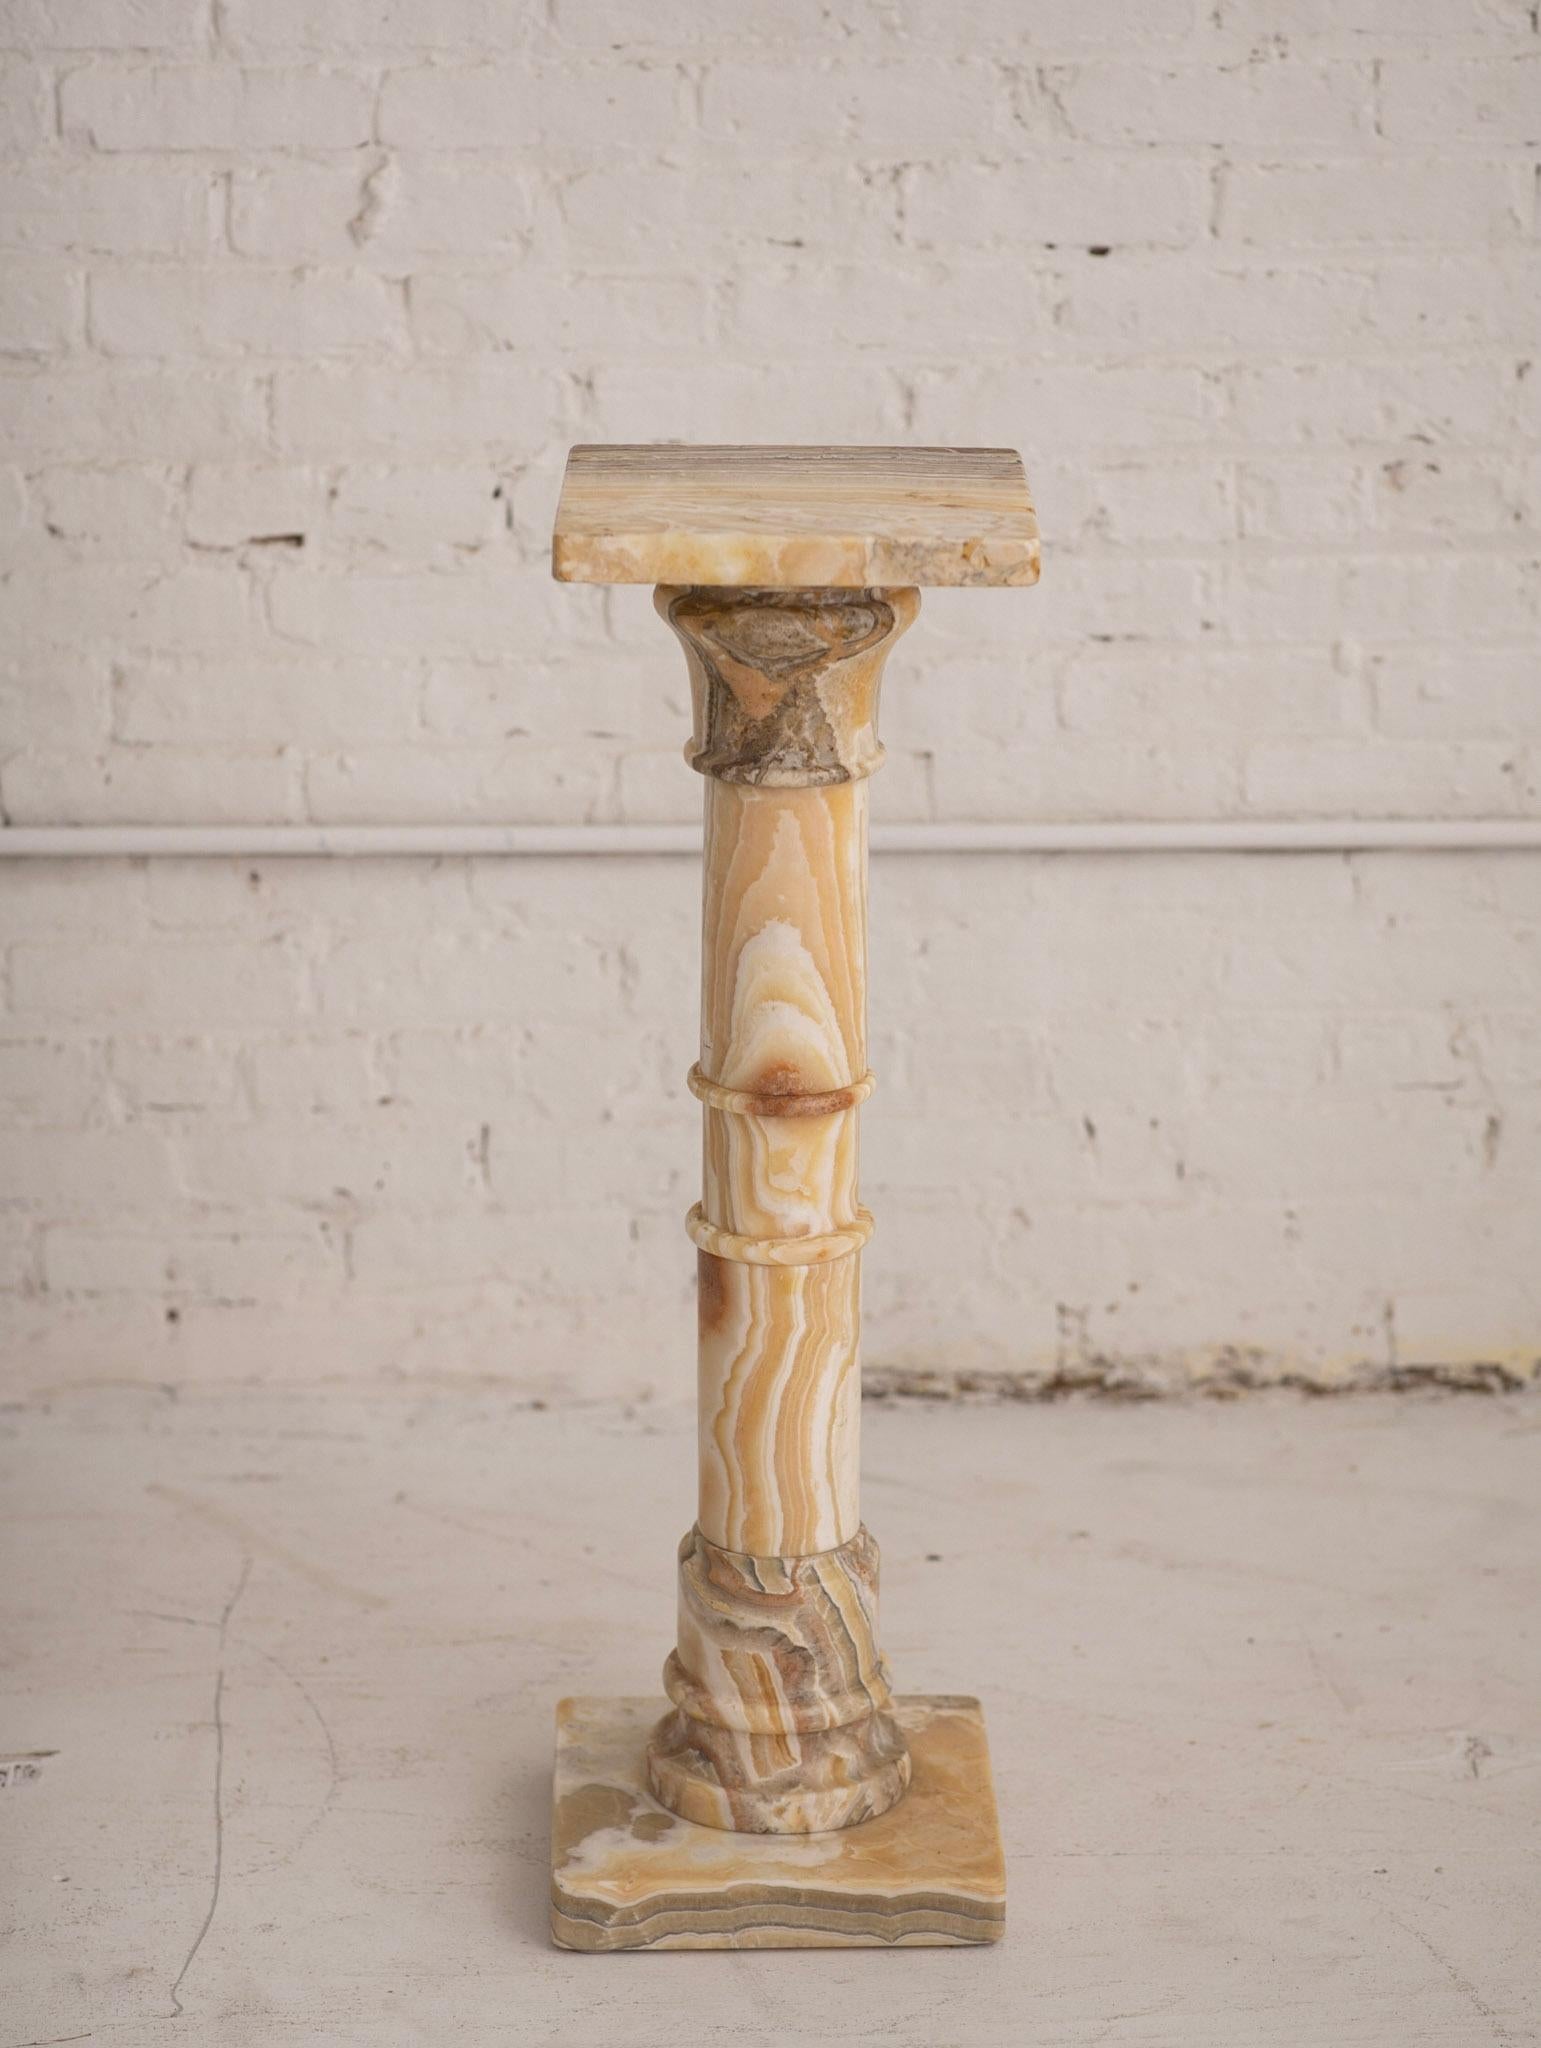 Neoclassical style marble pedestal. Heavy veining pattern ranging from caramels to beiges and browns. One solid piece.